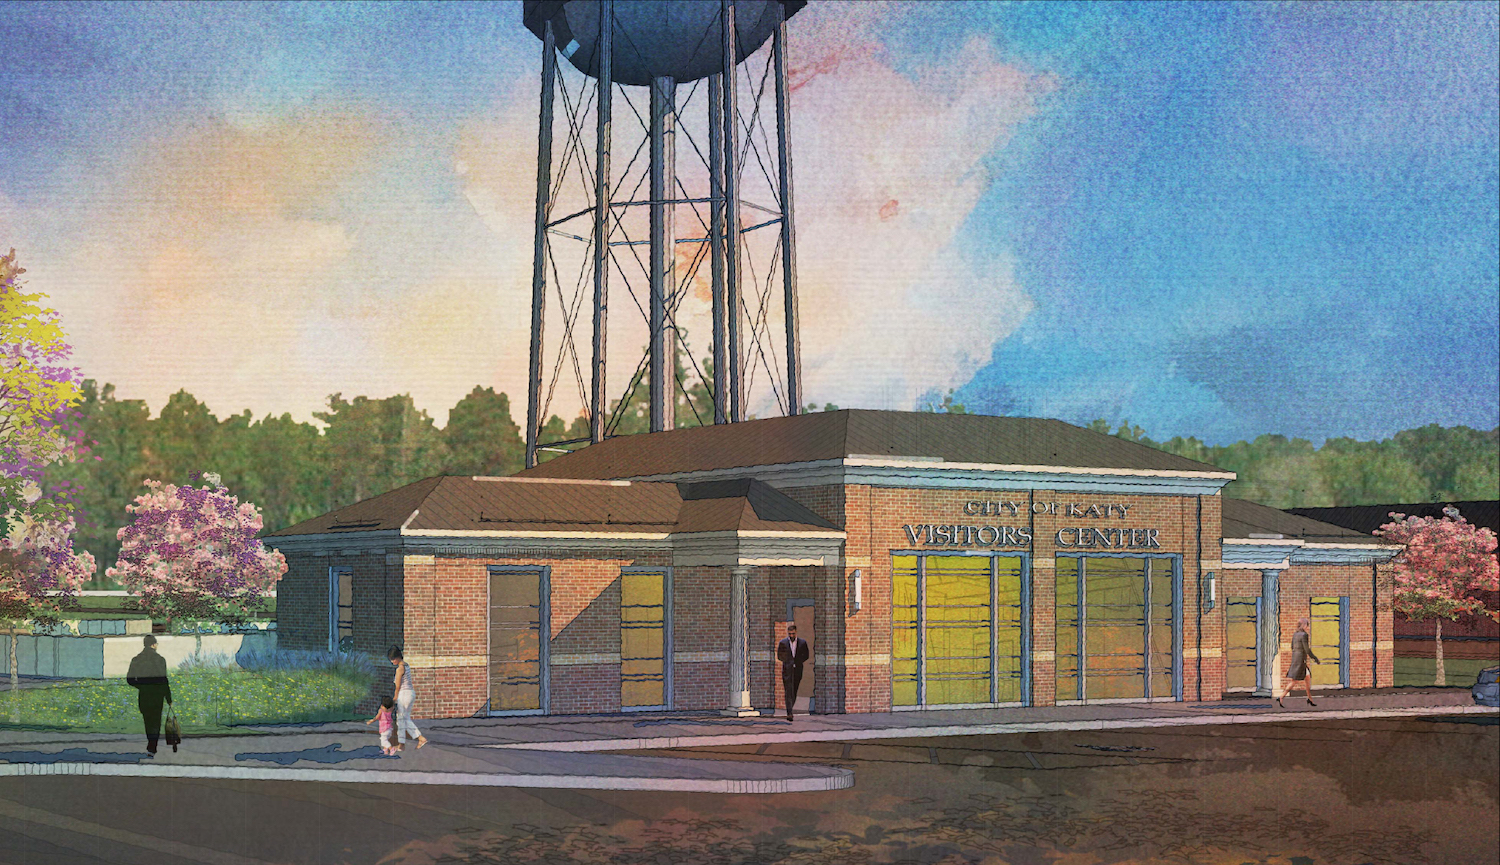 City of Katy awards $2.15M contract for civic and visitor center construction Photo